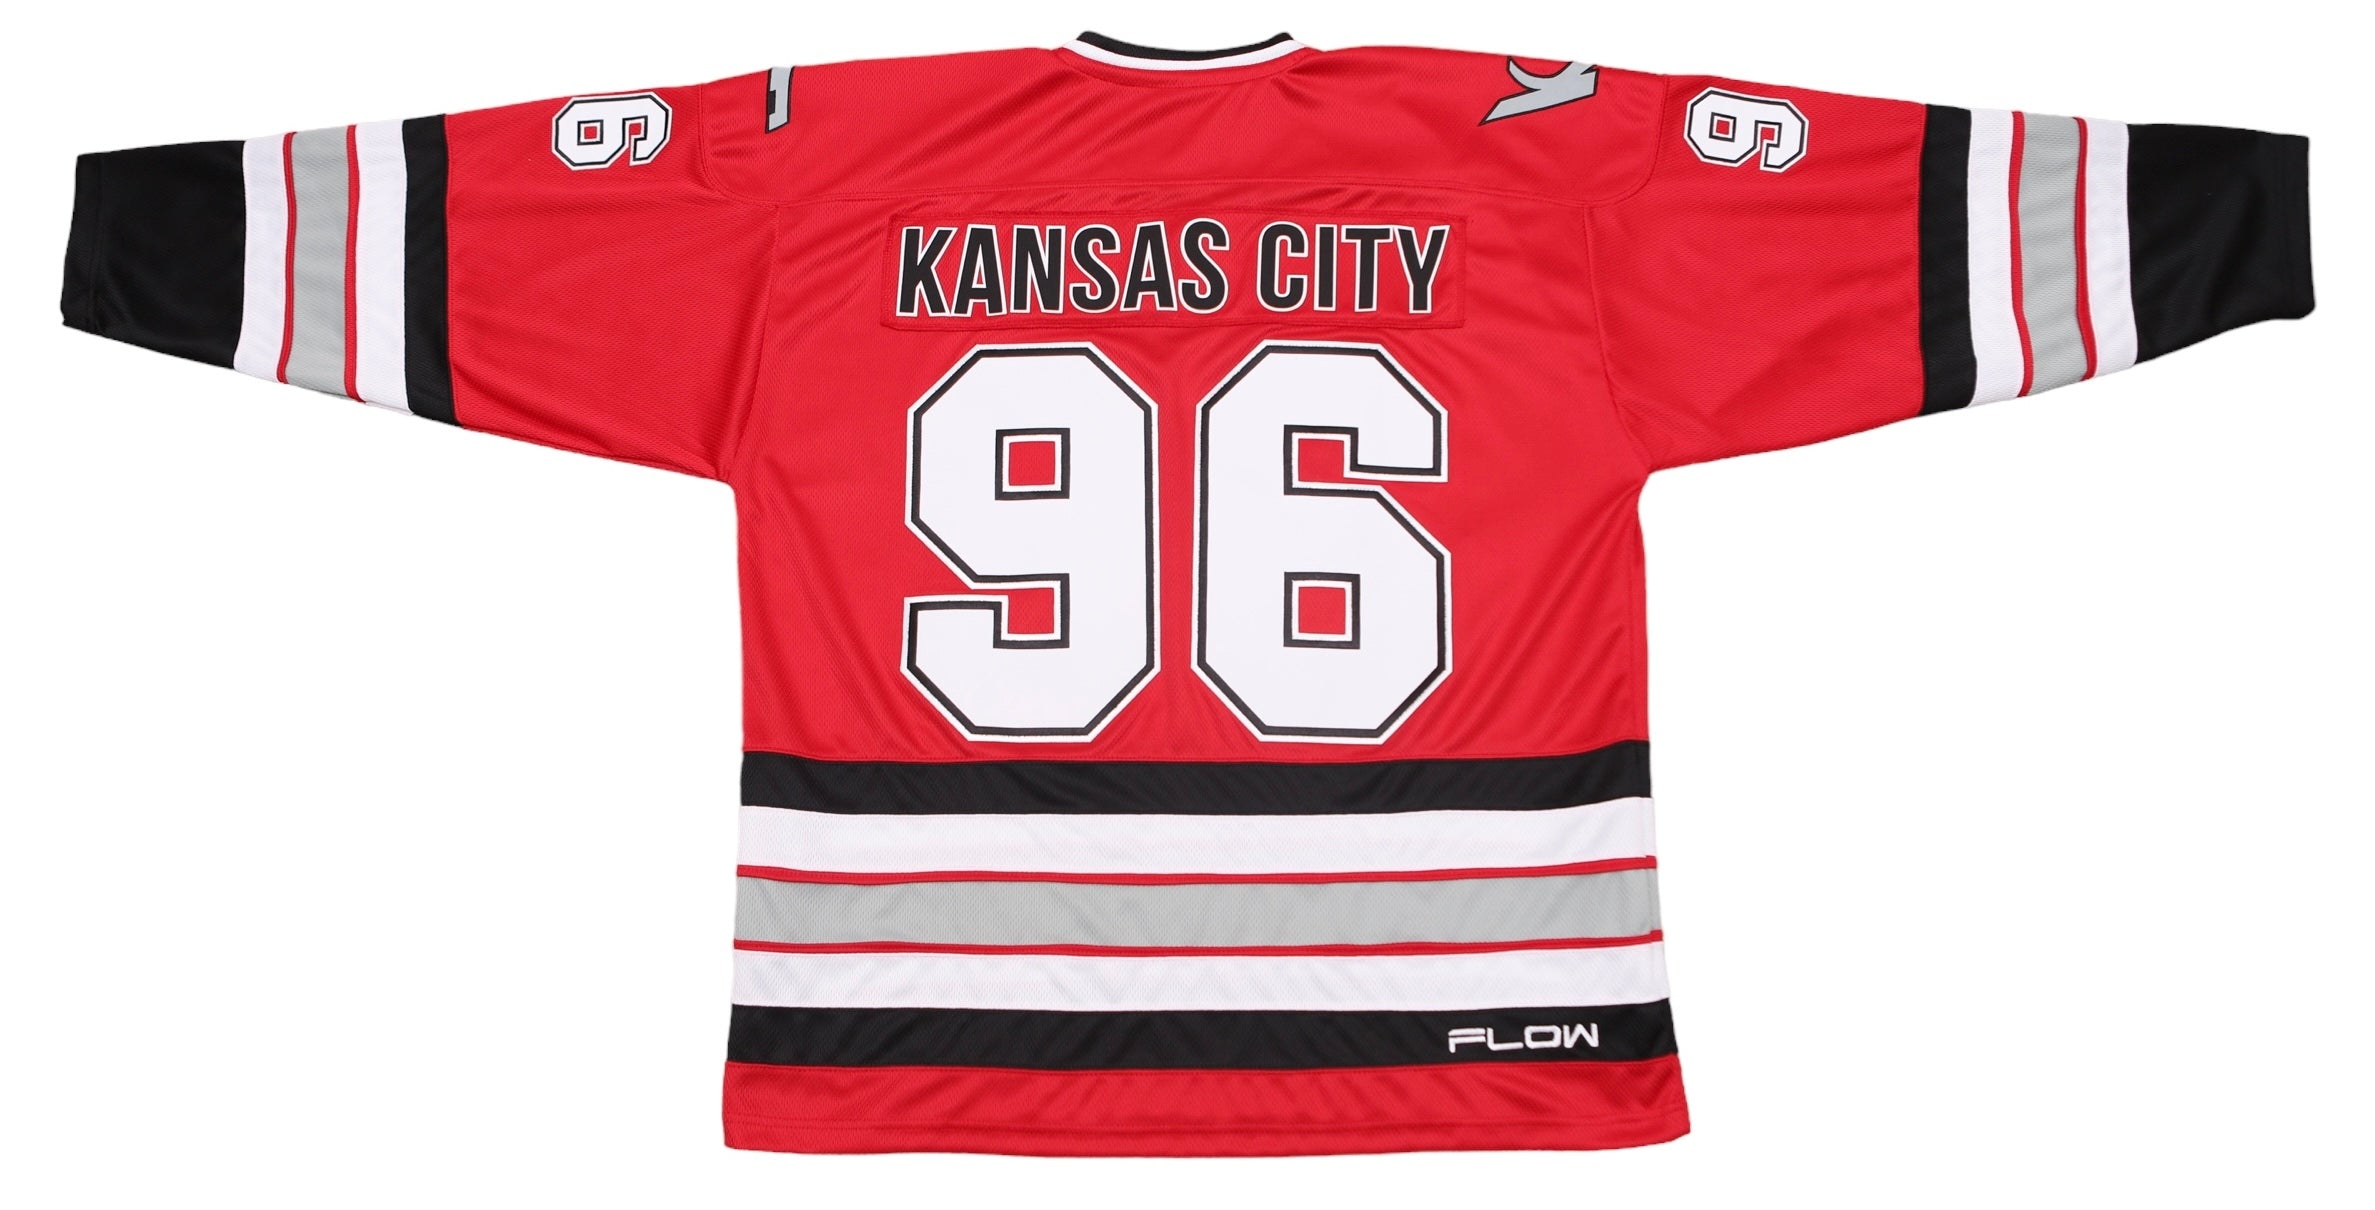 Custom Hockey Jerseys with A Chiefs Embroidered Twill Logo Adult Small / (name and Sleeve Numbers) / White